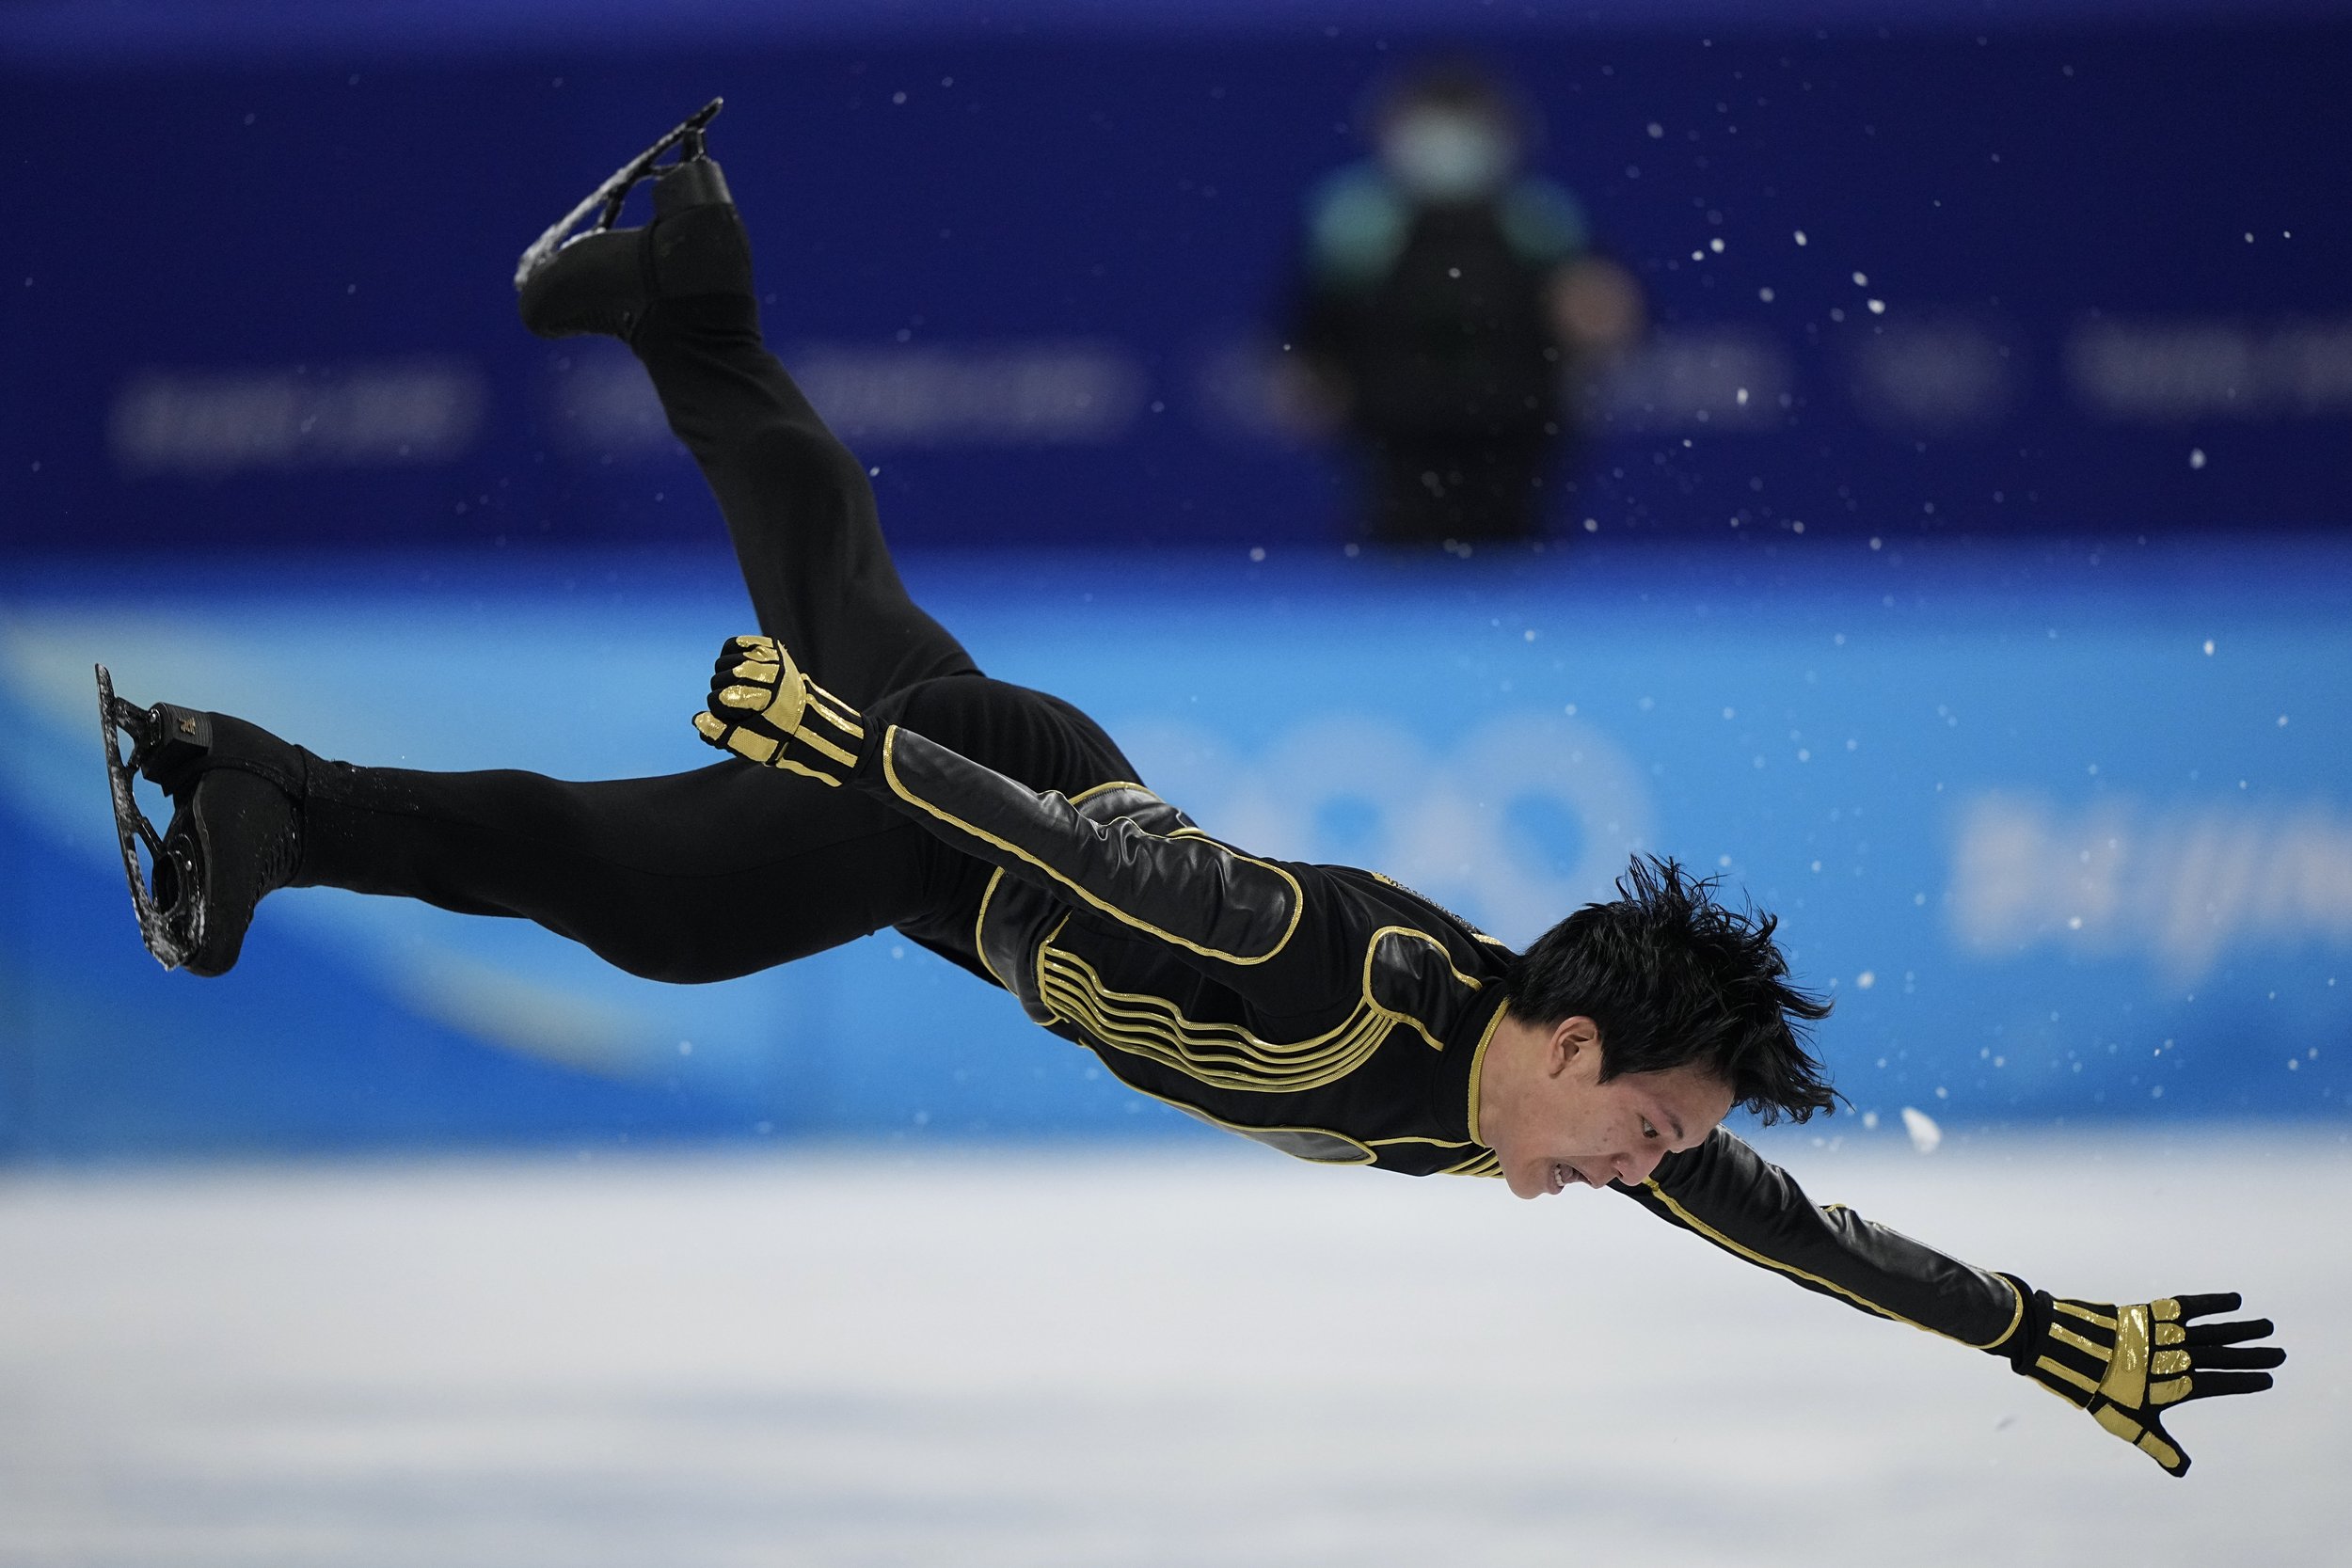  Adam Siao Him Fa of France, competes in the men's free skate program during the figure skating event at the 2022 Winter Olympics, Thursday, Feb. 10, 2022, in Beijing. (AP Photo/David J. Phillip) 